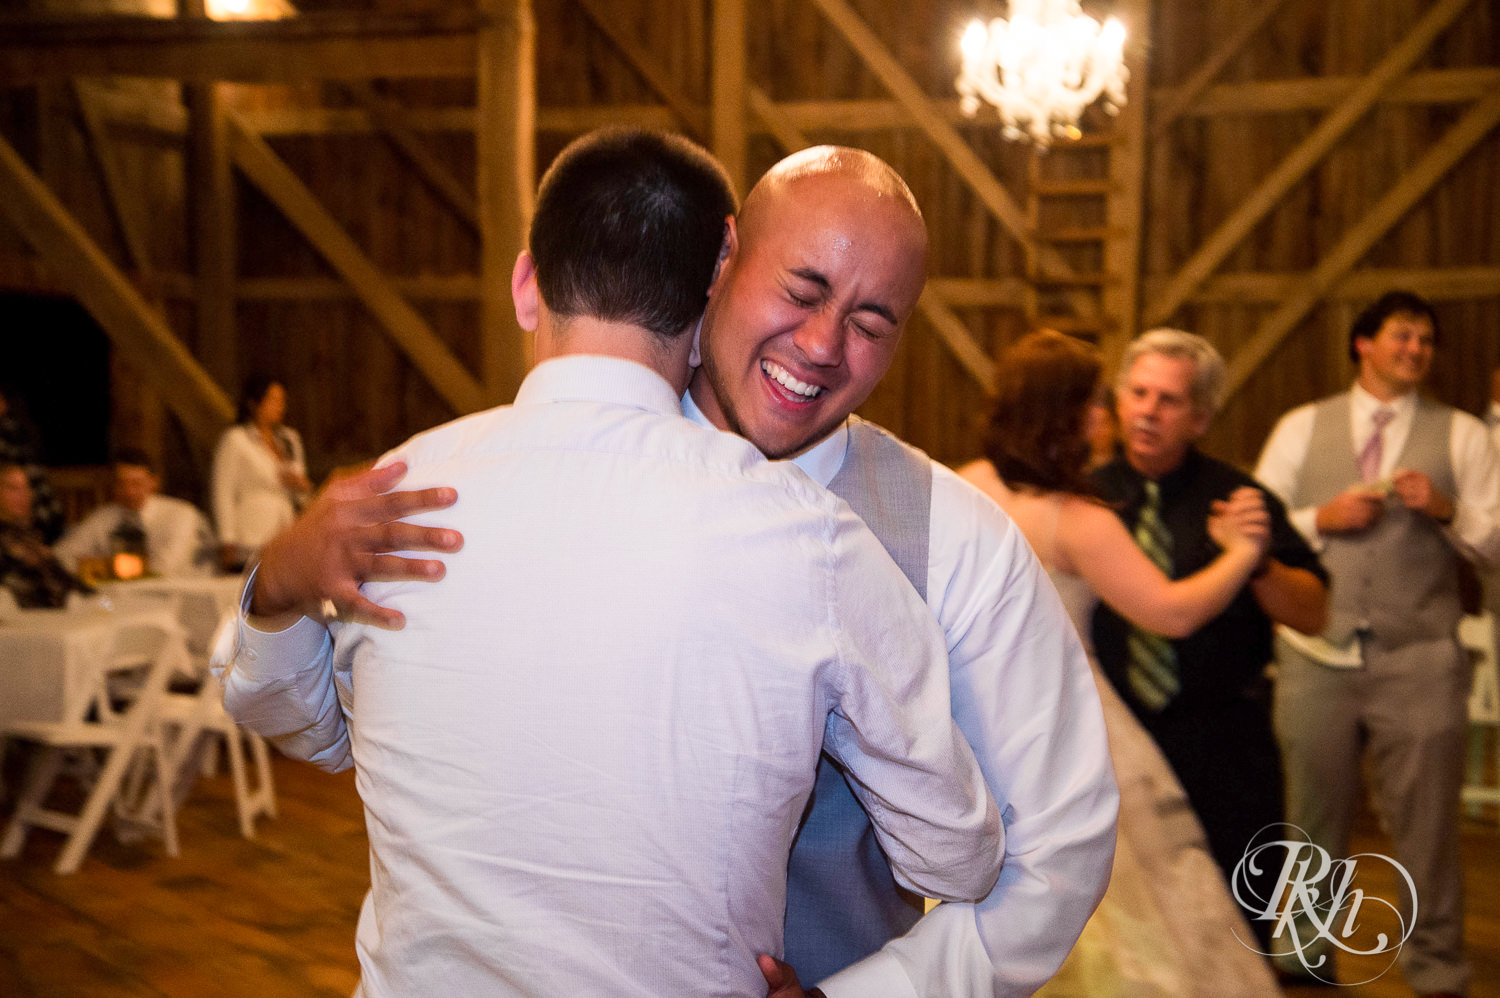 Bride and guests dance during wedding reception at Birch Hill Barn in Glenwood City, Wisconsin.